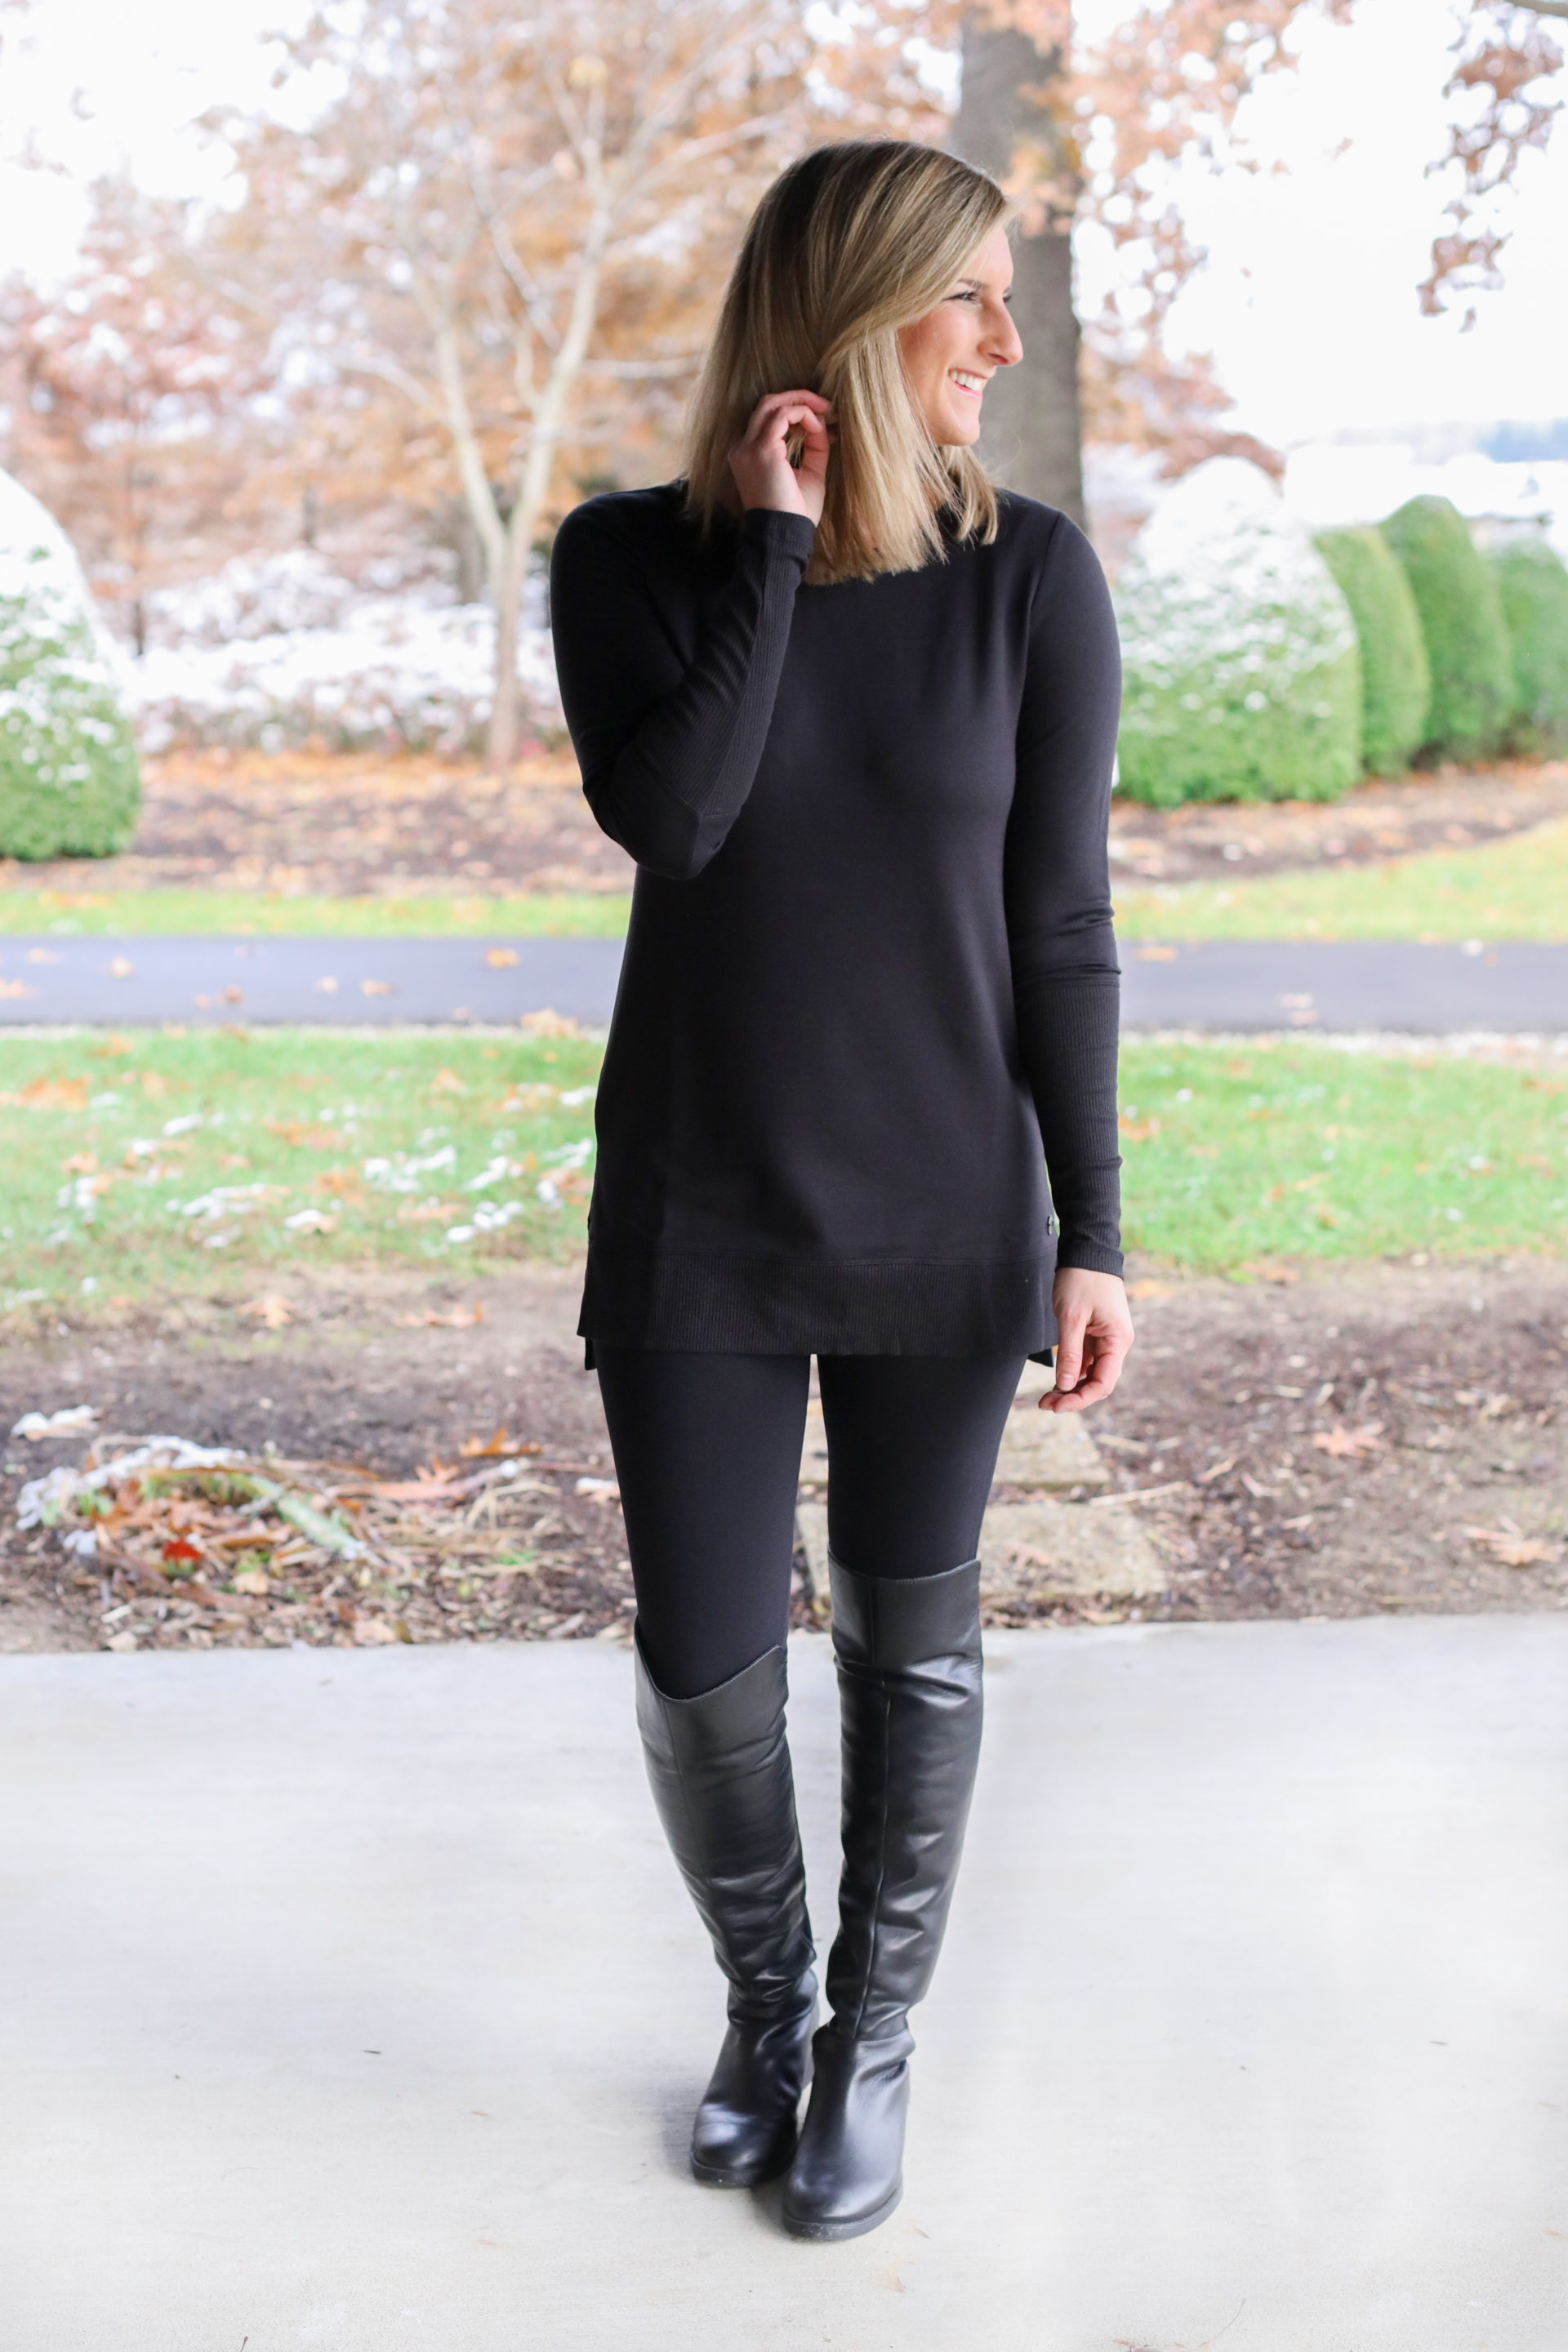 Best Tunic Dresses To Wear With Leggings For Women